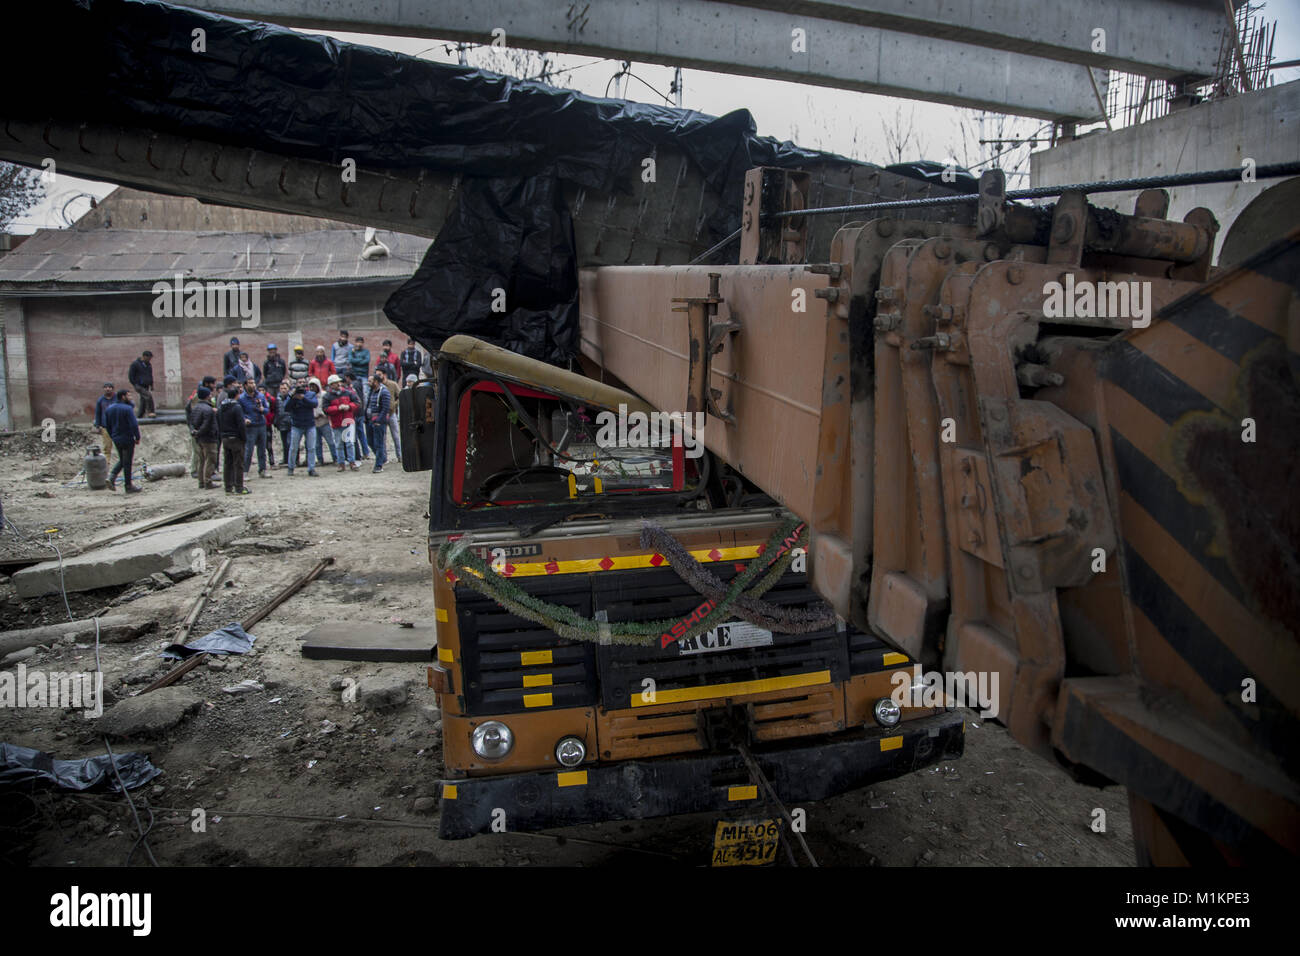 January 31, 2018 - Srinagar, Jammu and Kashmir, India - People look at a girder lying on a vehicle damaged after it fell from an under construction flyover following a powerful earthquake struck northern Afghanistan with tremors felt as widely as Pakistan and northern India, on January 31, 2018 in Srinagar, the summer capital of Indian administered Kashmir, India. The magnitude 6.1 quake was centered in the mountainous Hindu Kush region, the US Geological Survey reported. A young girl was killed and five others wounded in the village of Lasbela in Pakistan's Baluchistan province when the ro Stock Photo